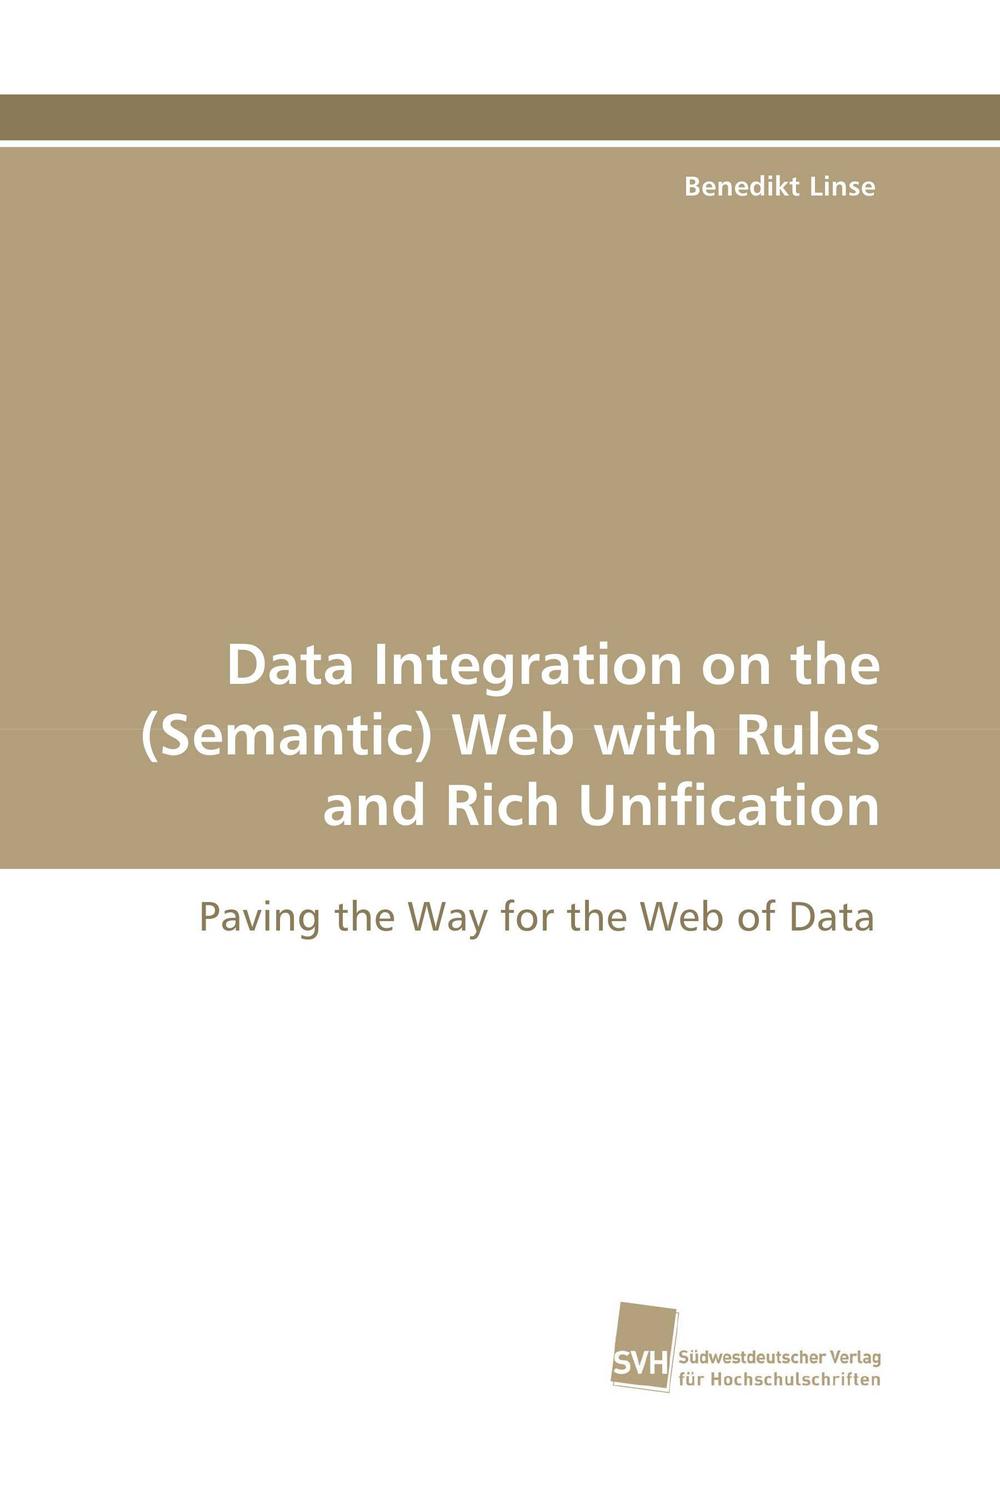 Data Integration on the (Semantic) Web with Rules and Rich Unification - Benedikt Linse